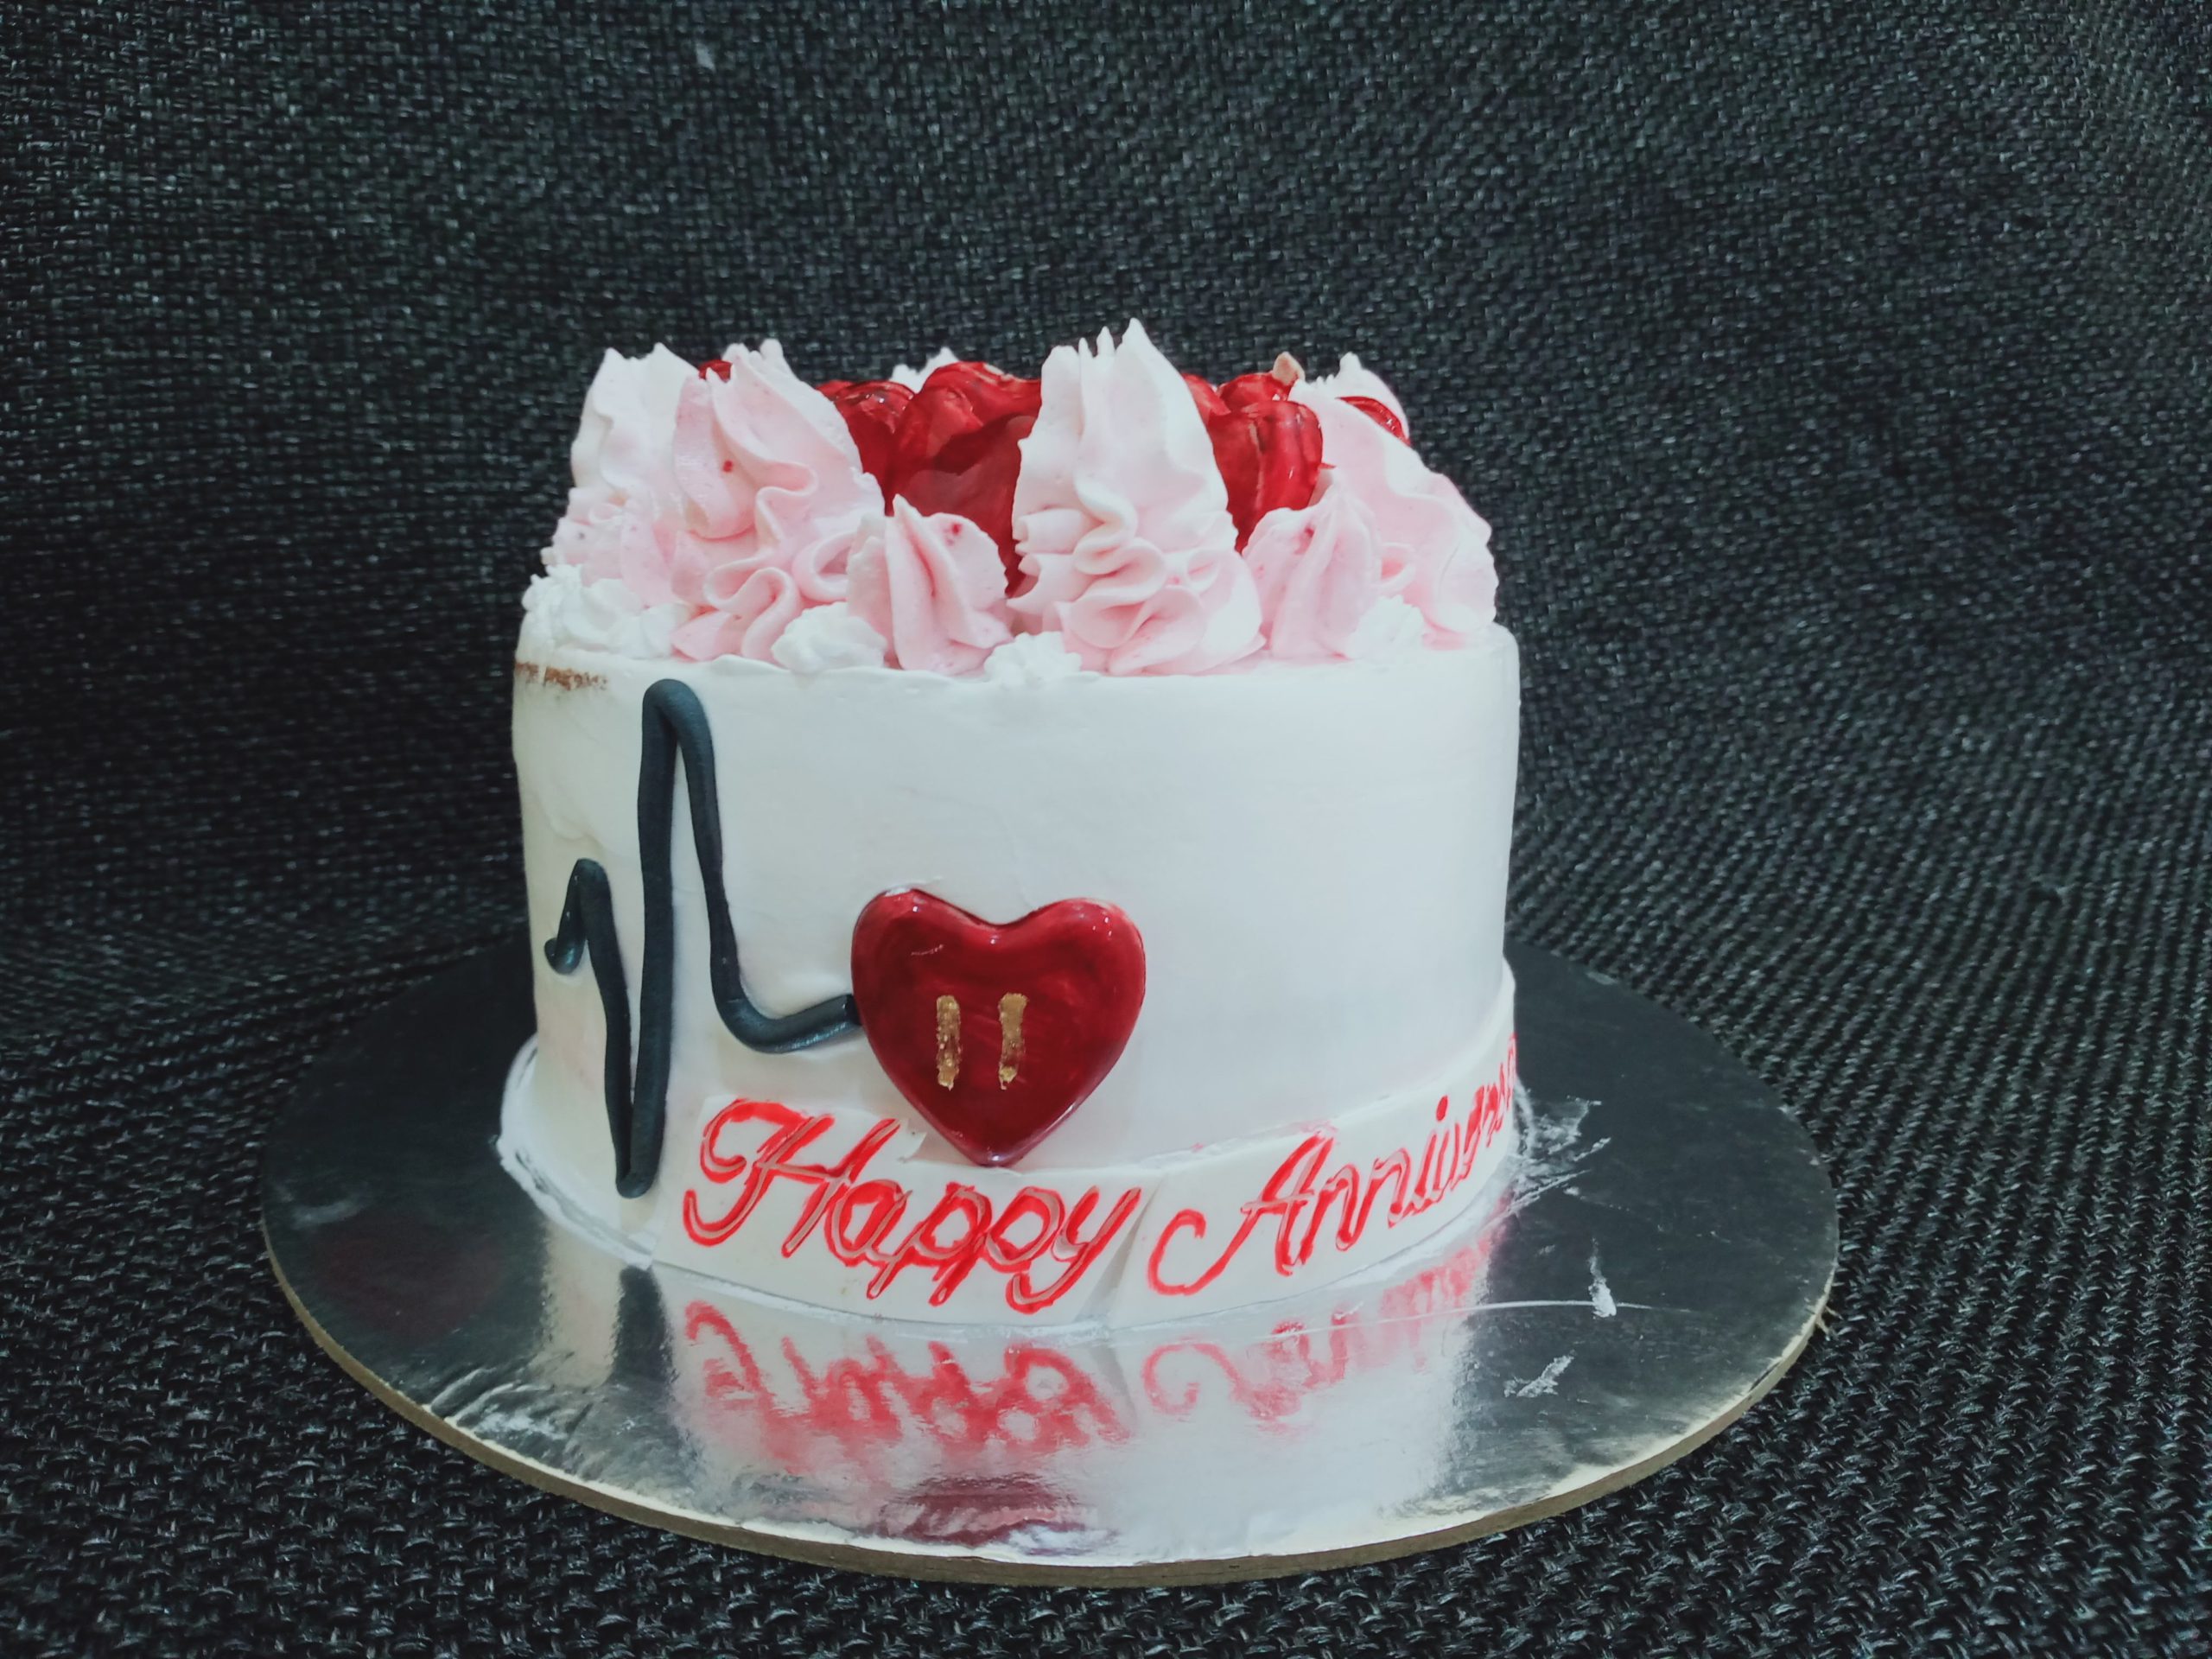 Heart Beat Theme Cake Designs, Images, Price Near Me